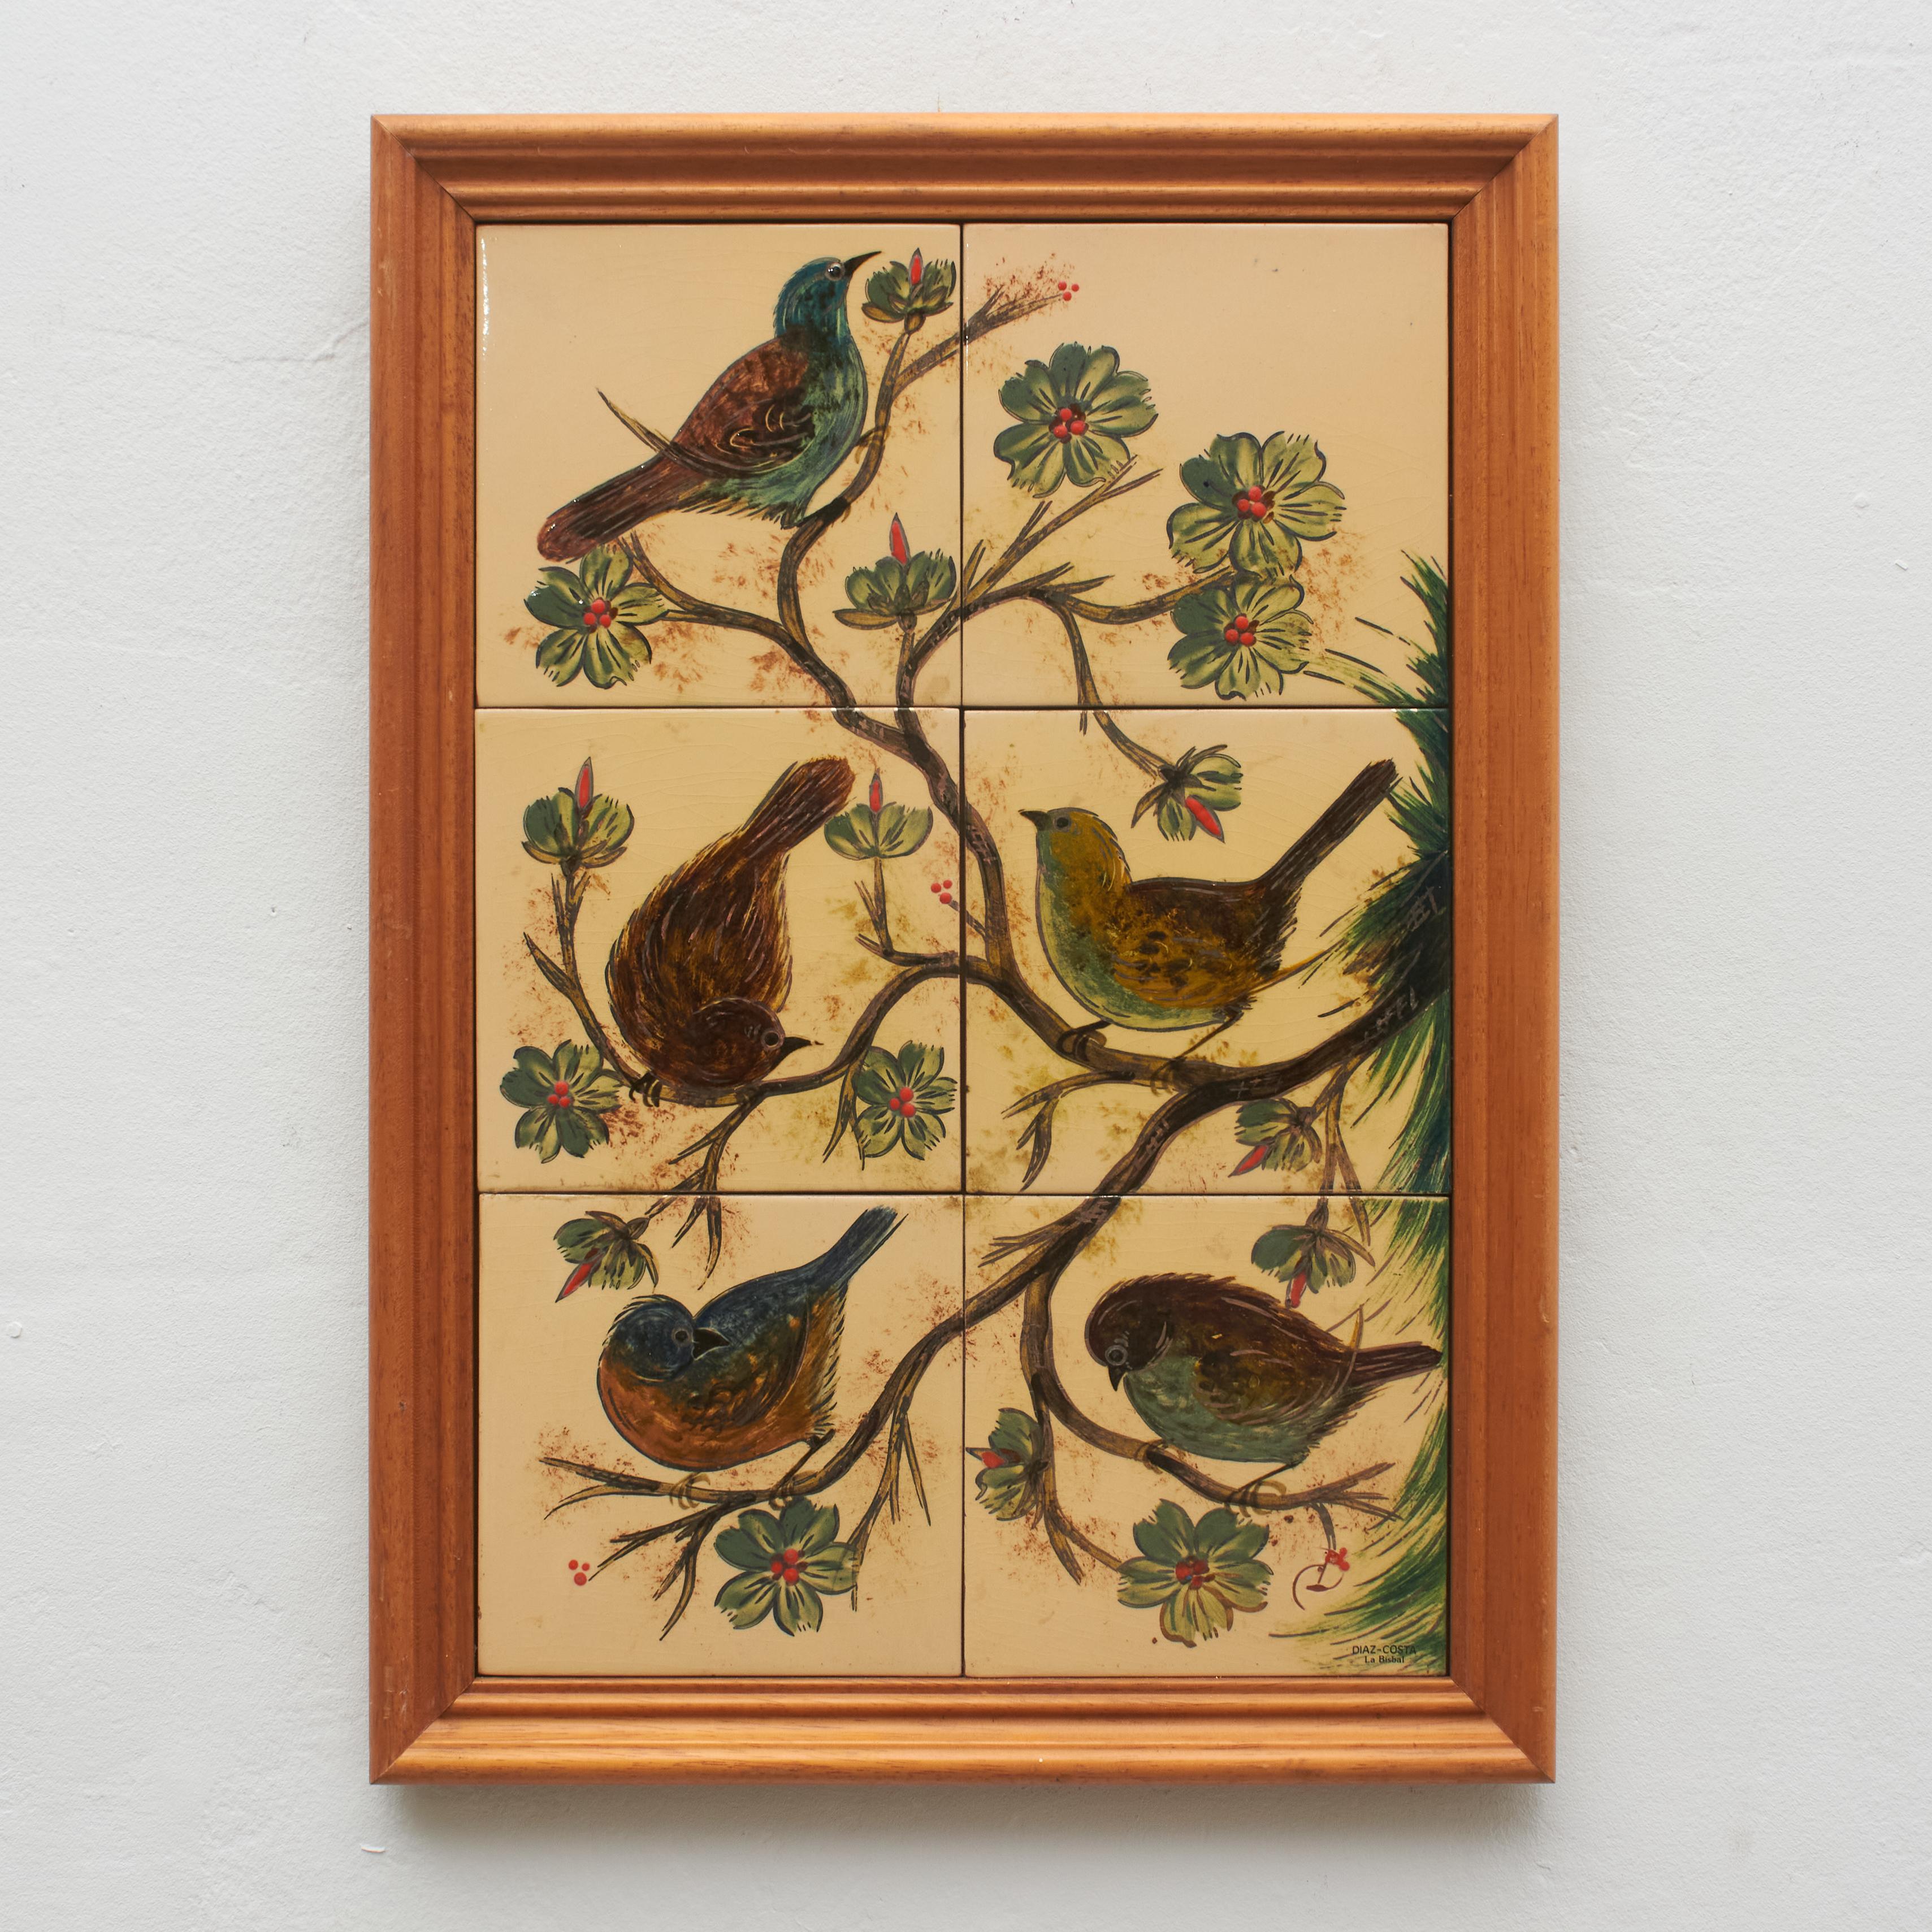 Ceramic hand painted artwork of several birds by Catalan artist Diaz Costa, circa 1960.
Framed. Signed.

In original condition, with minor wear consistent of age and use, preserving a beautiul patina.